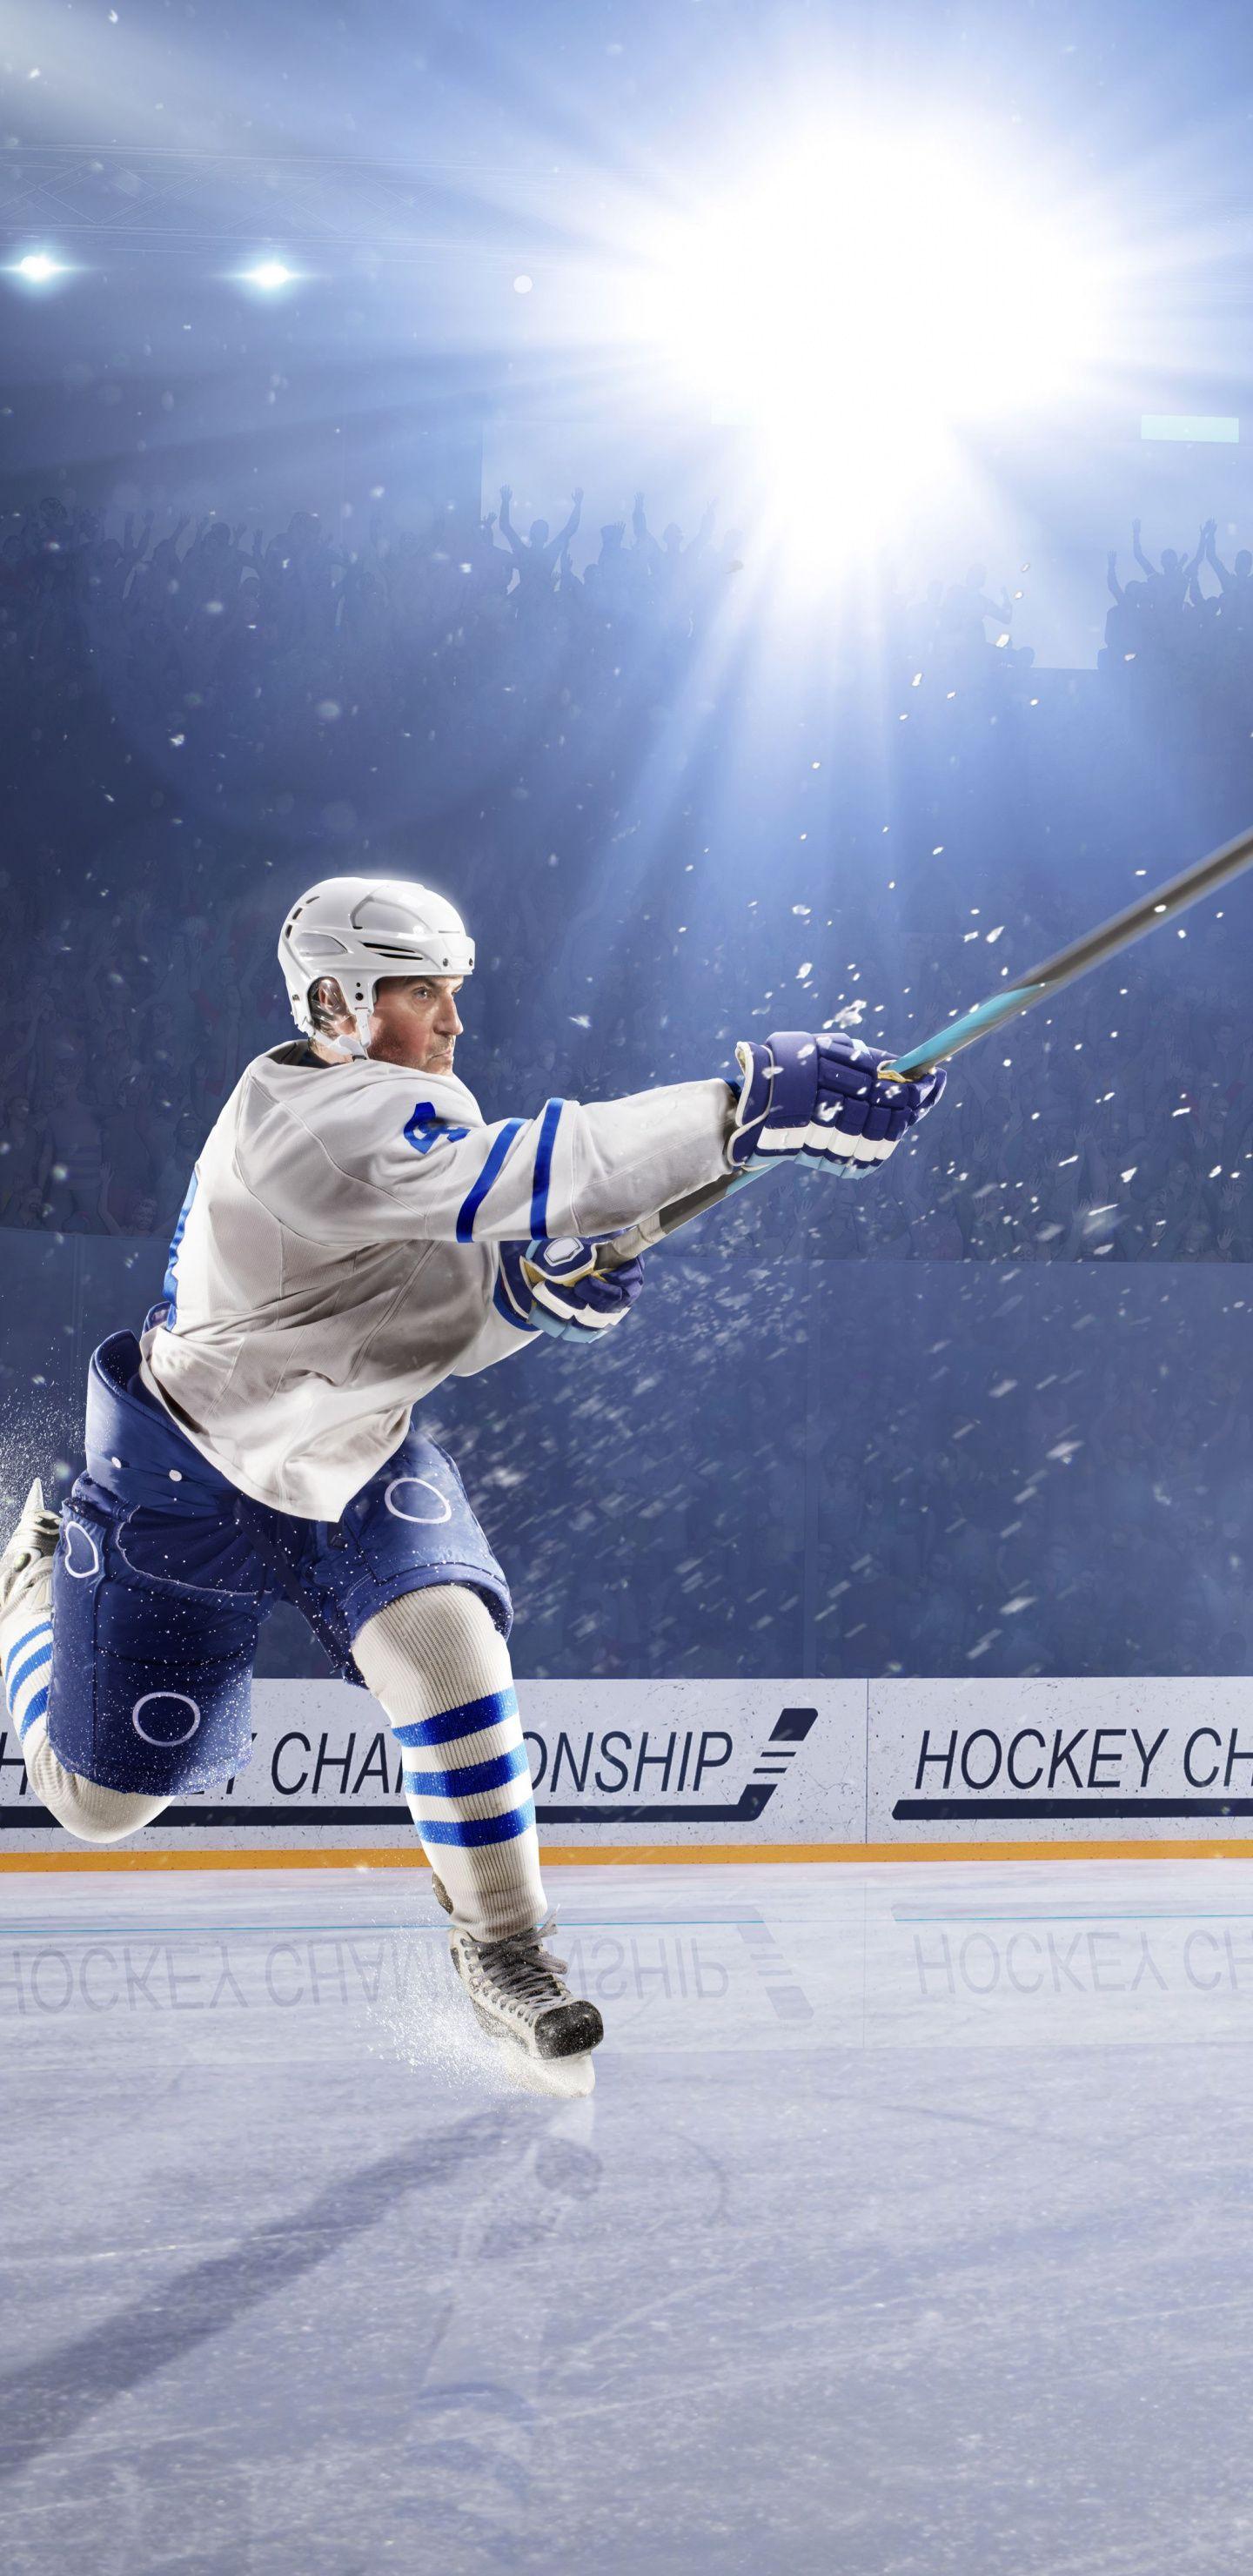 Download 1440x2960 Wallpaper National Hockey League, National Ice